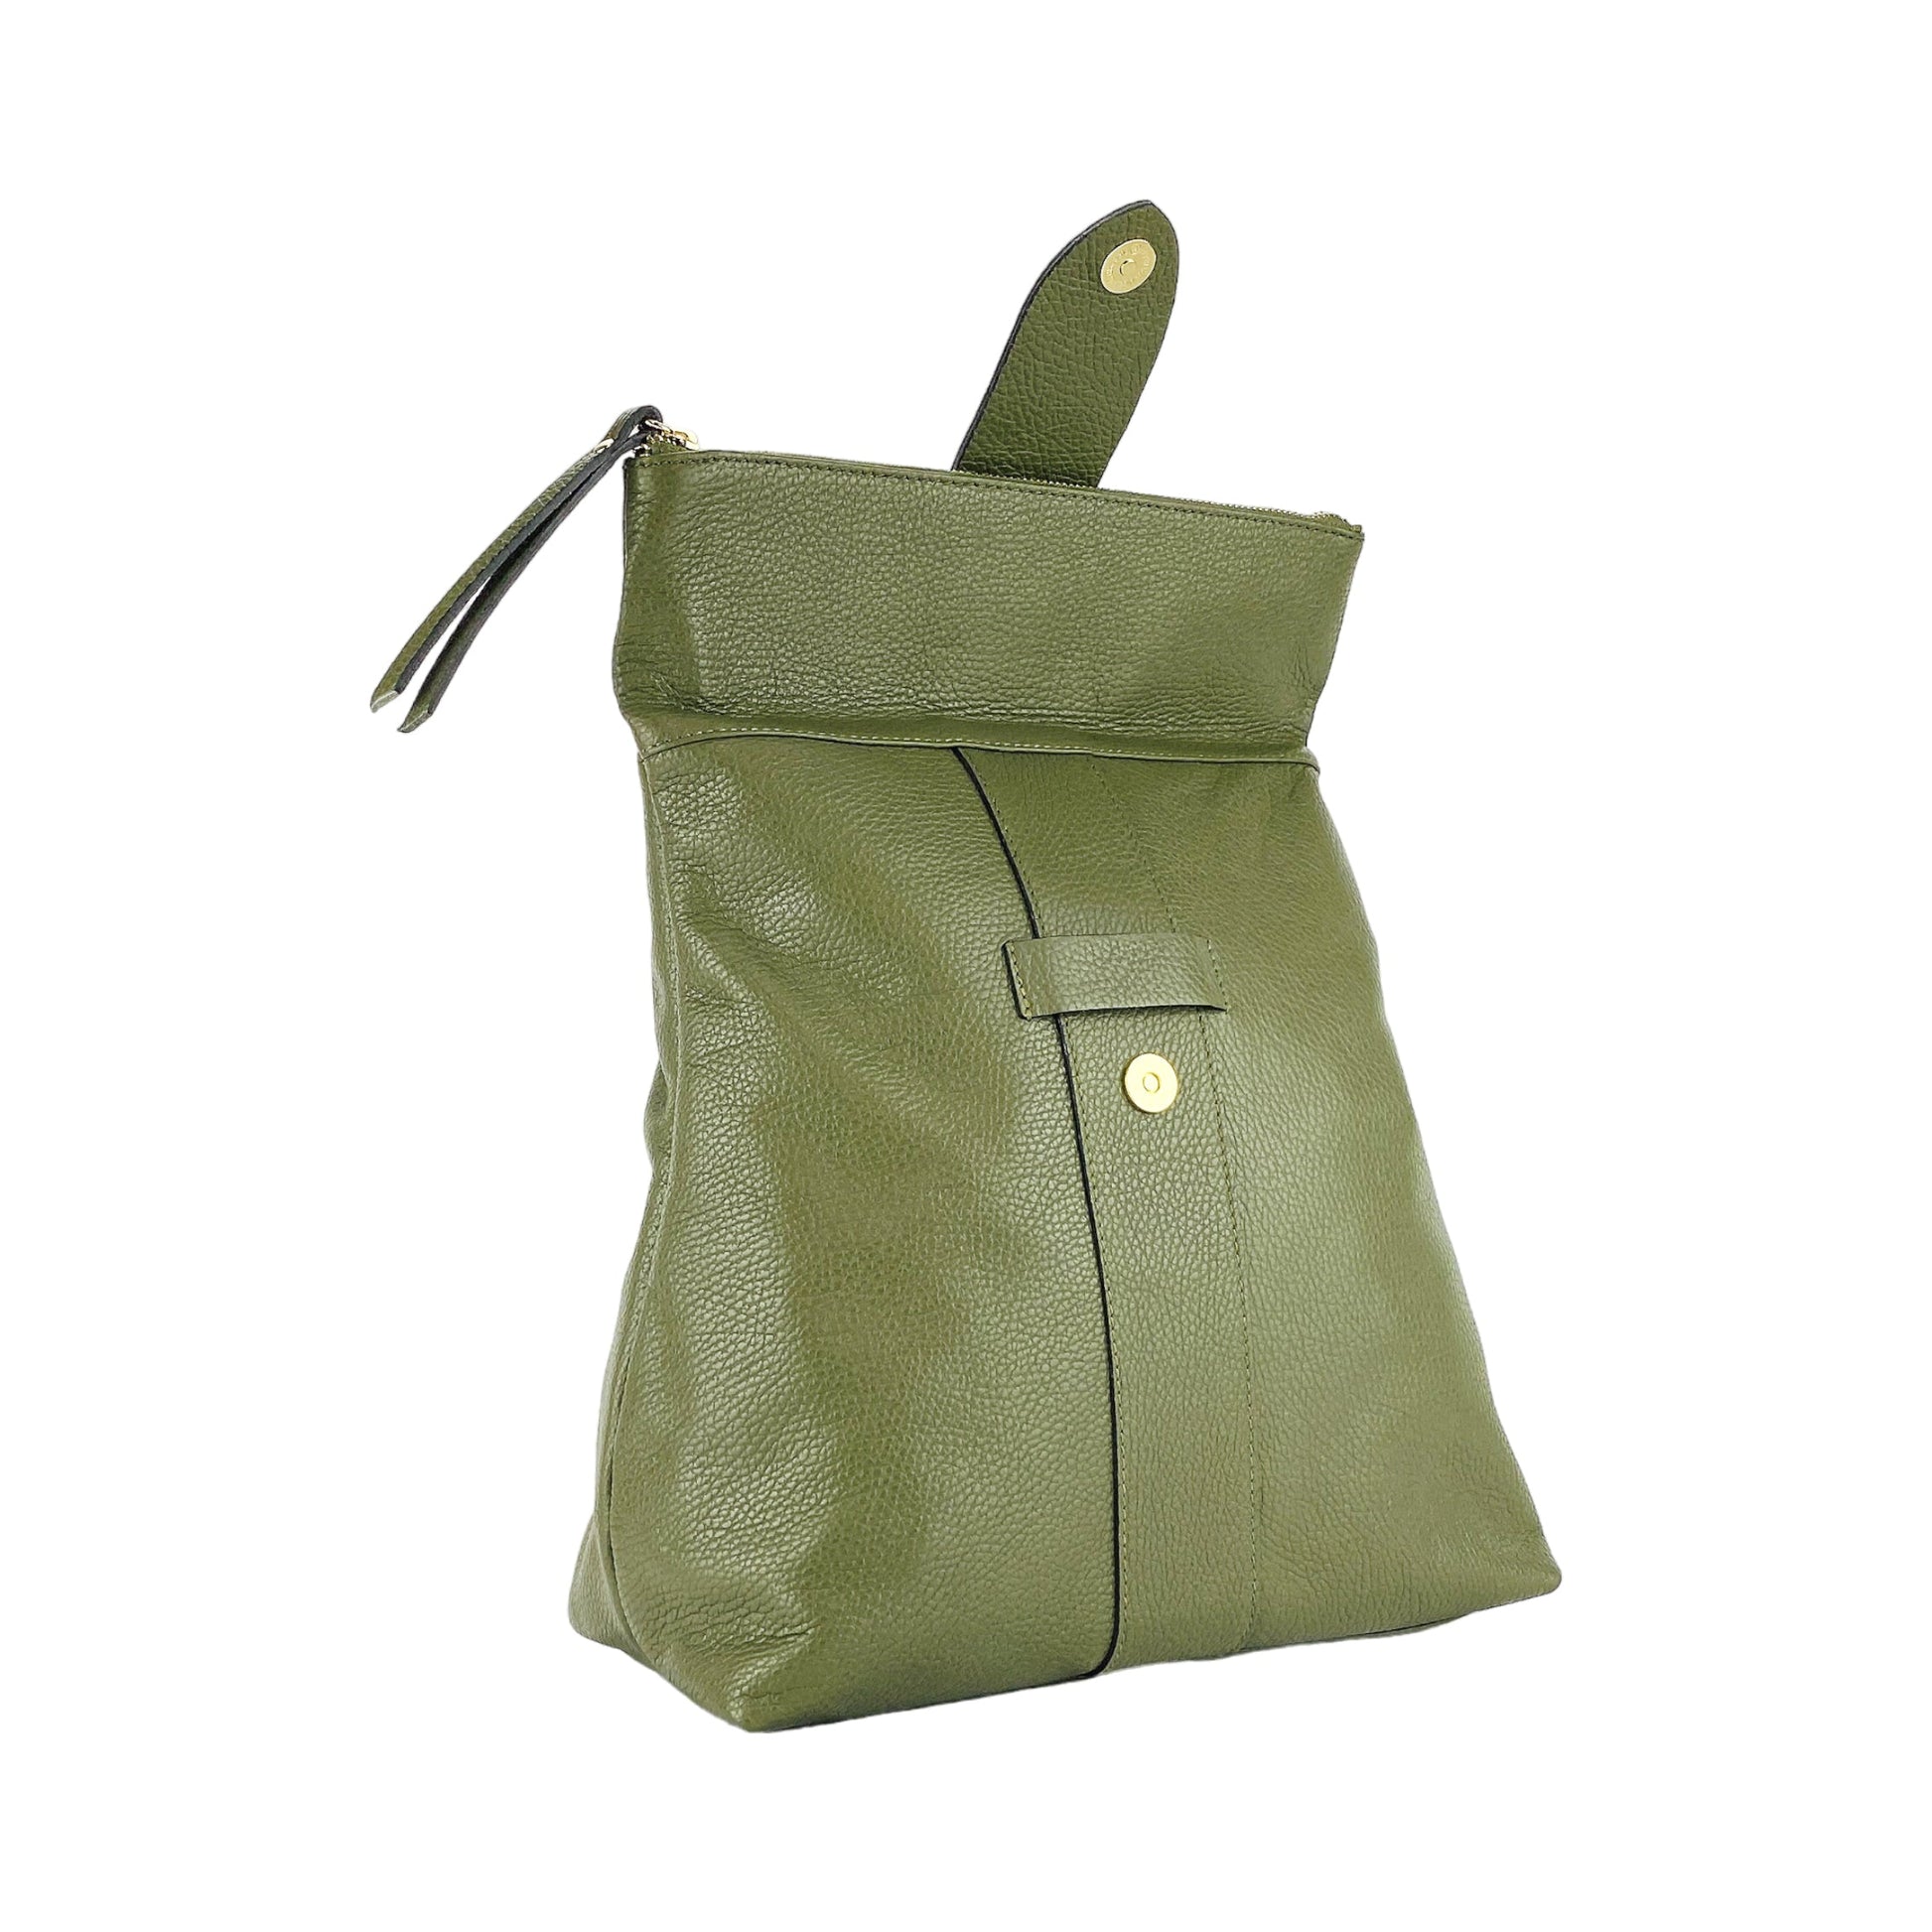 RB1021E | Soft women's backpack in genuine leather Made in Italy with adjustable shoulder straps. Zipper and accessories in shiny gold metal - Green color - Dimensions: 30 x 34 x 10.5 cm-6